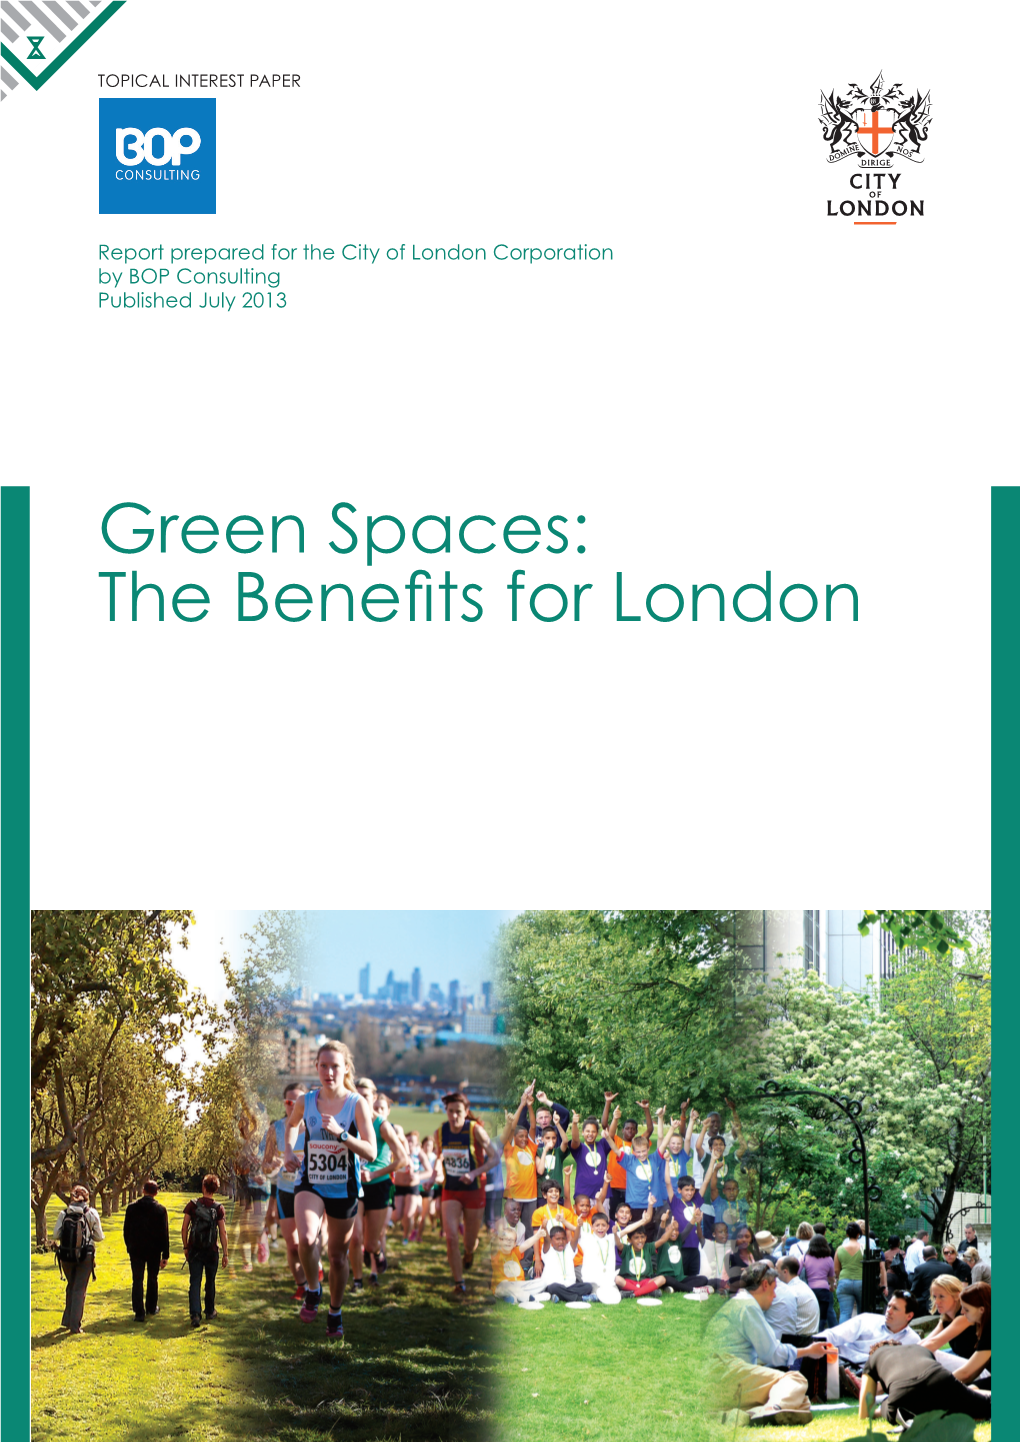 Green Spaces: the Benefits for London Is Published by the City of London Corporation